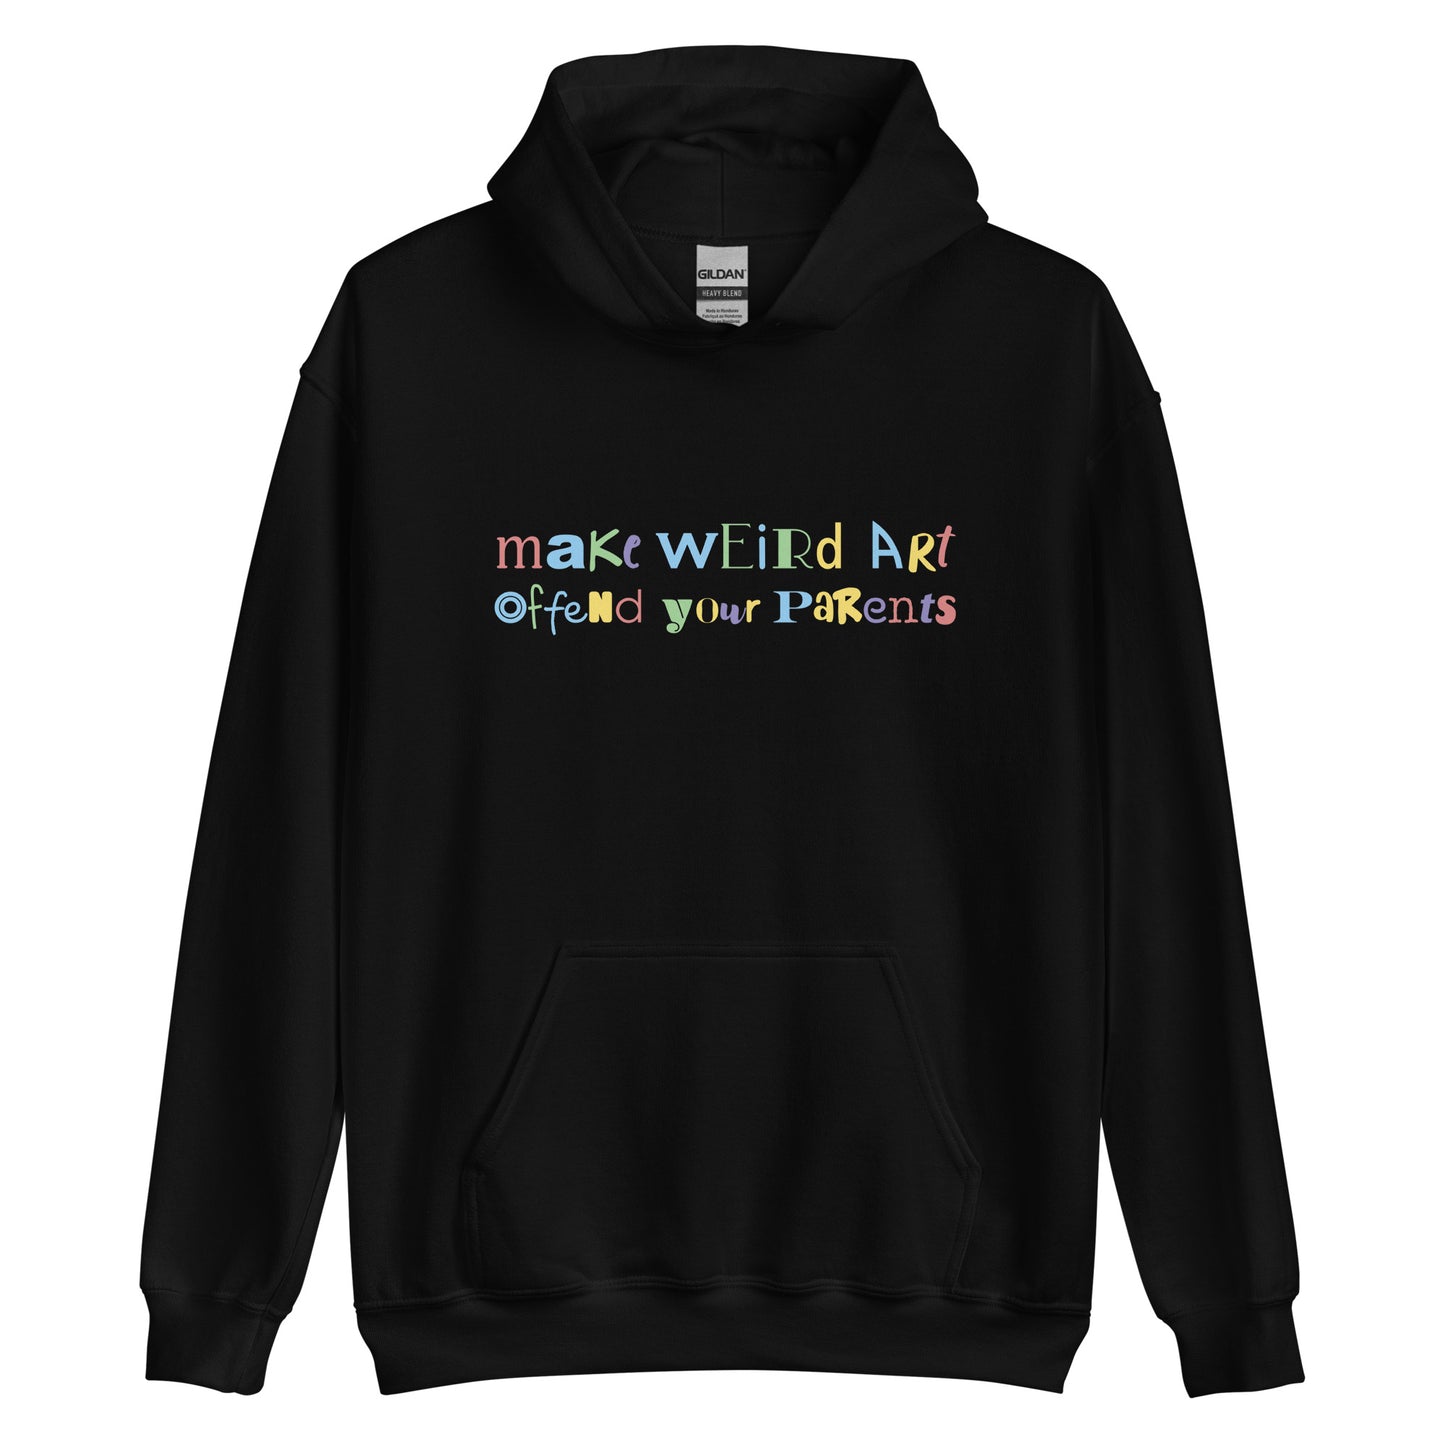 A black hooded sweatshirt featuring text that reads "make weird art, offend your parents" in a mix of different font styles and colors